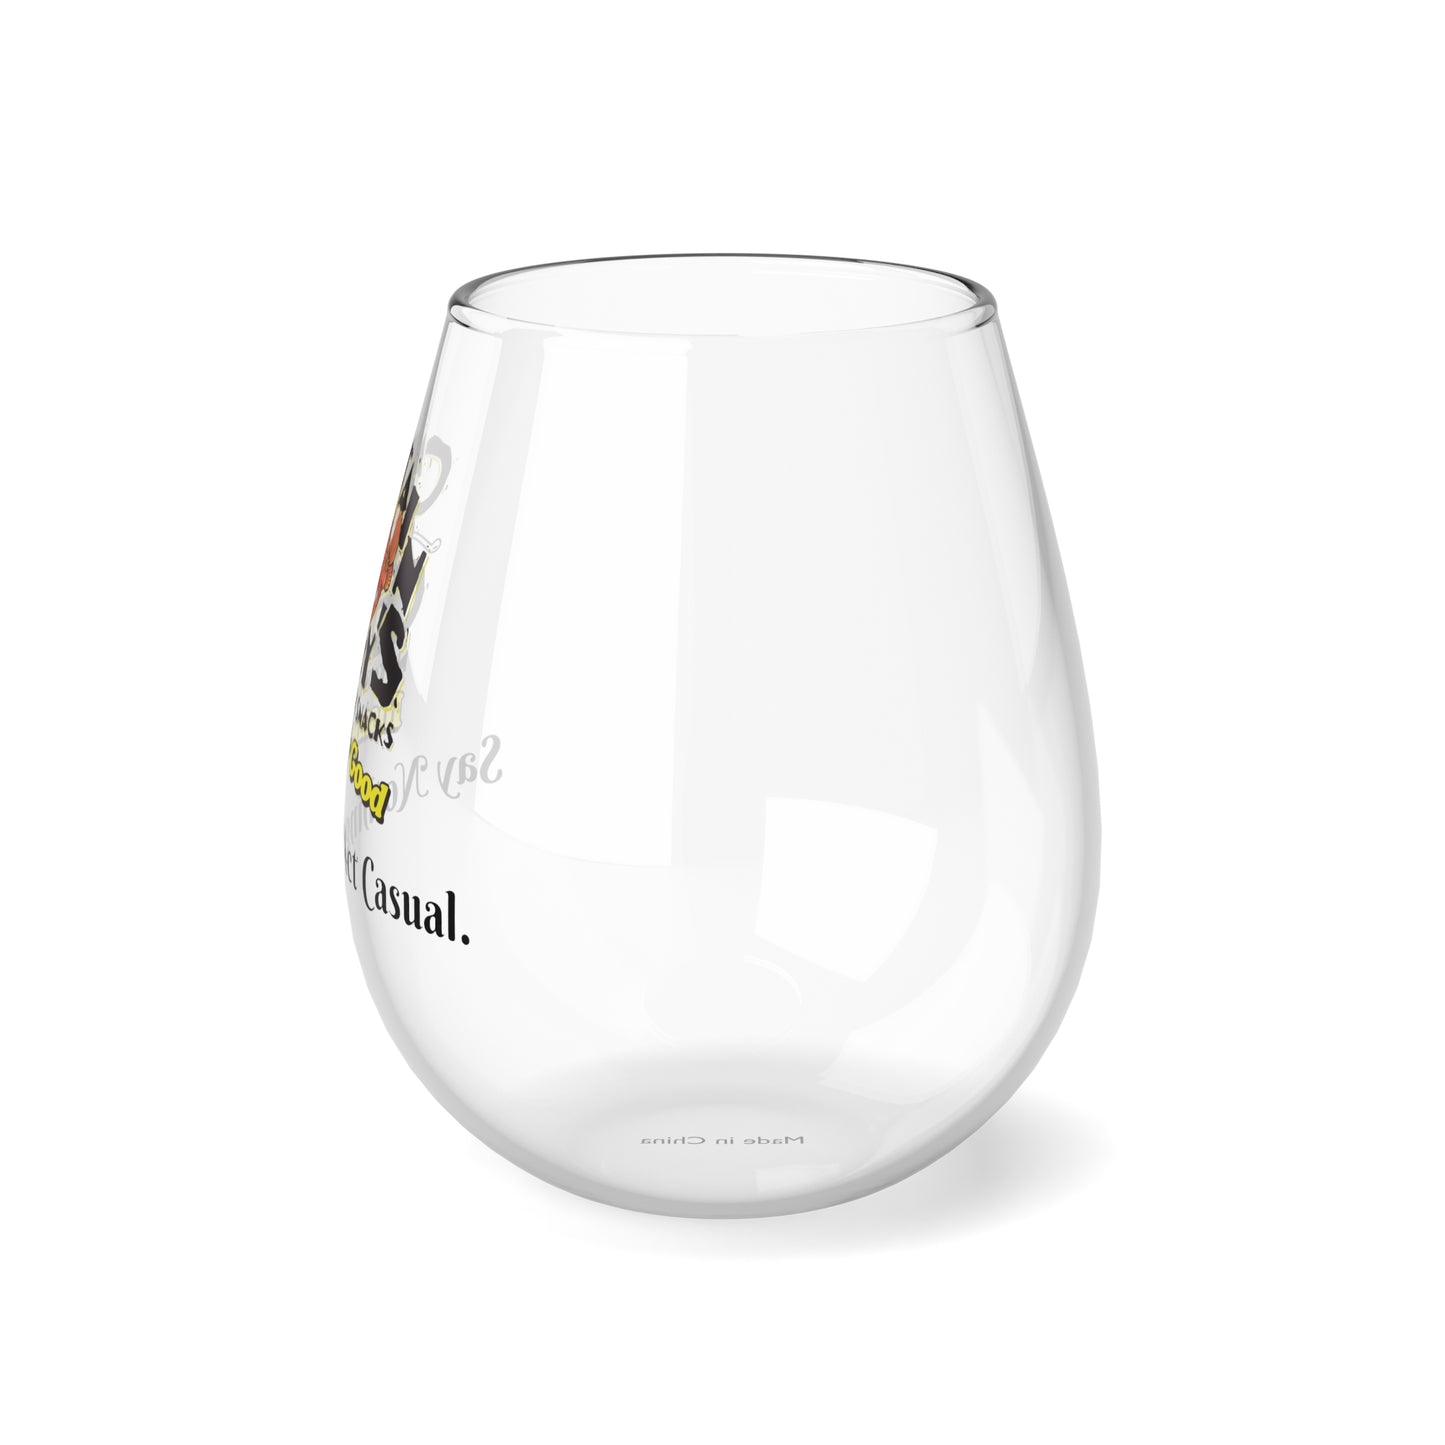 Captain Crazy's Stemless Wine Glass "Say Nothing. Act Casual."